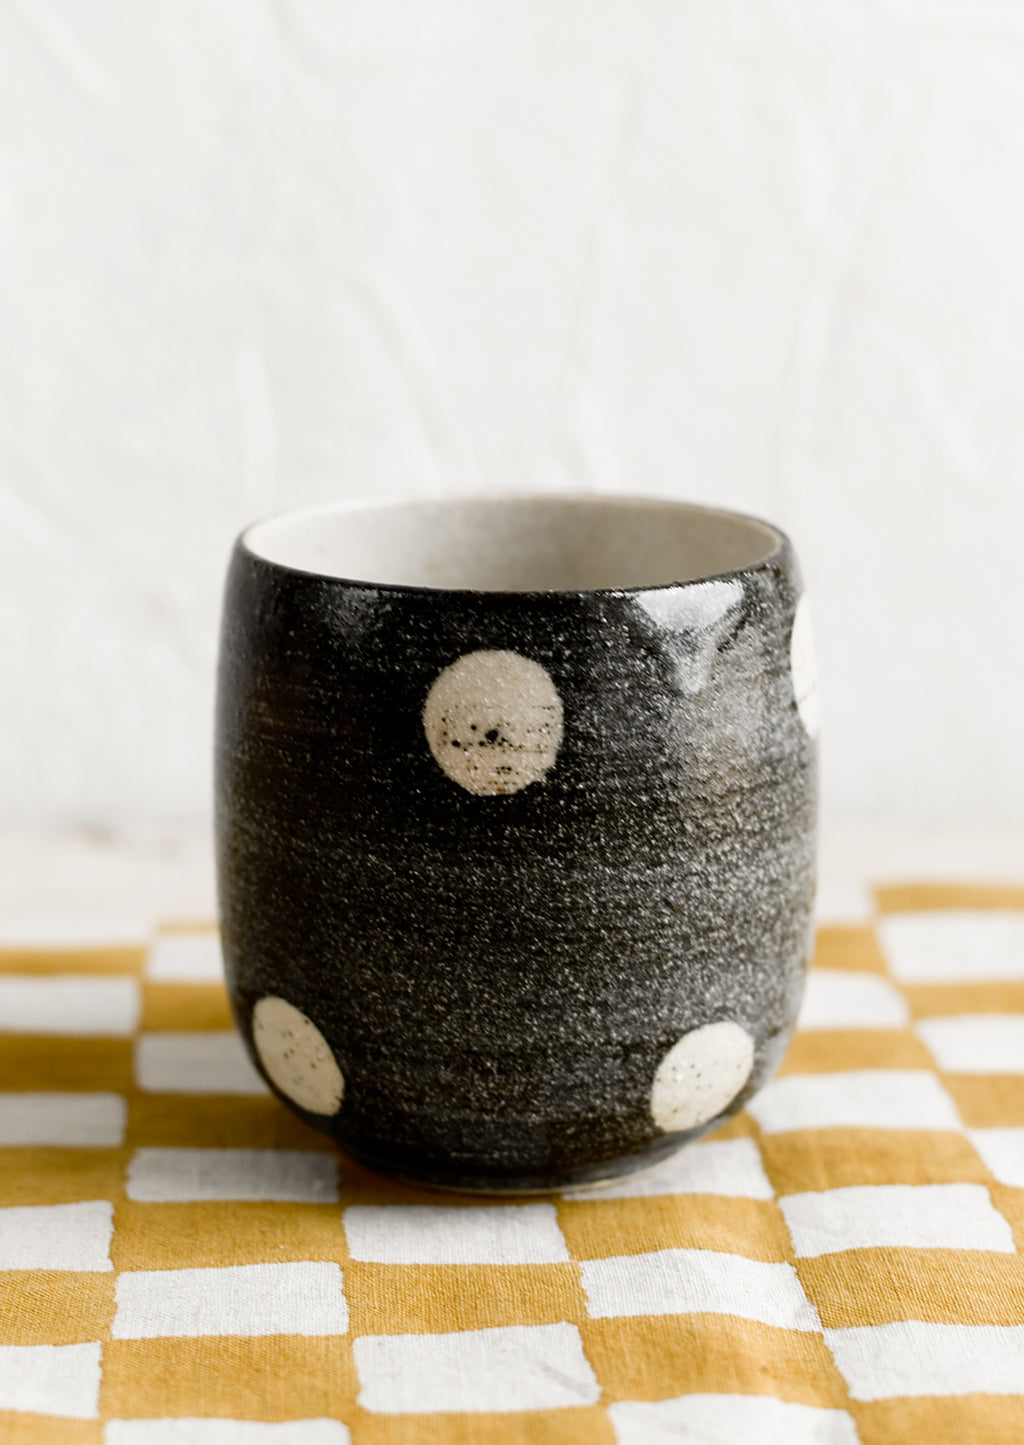 Black: A black ceramic cup with white polka dots.